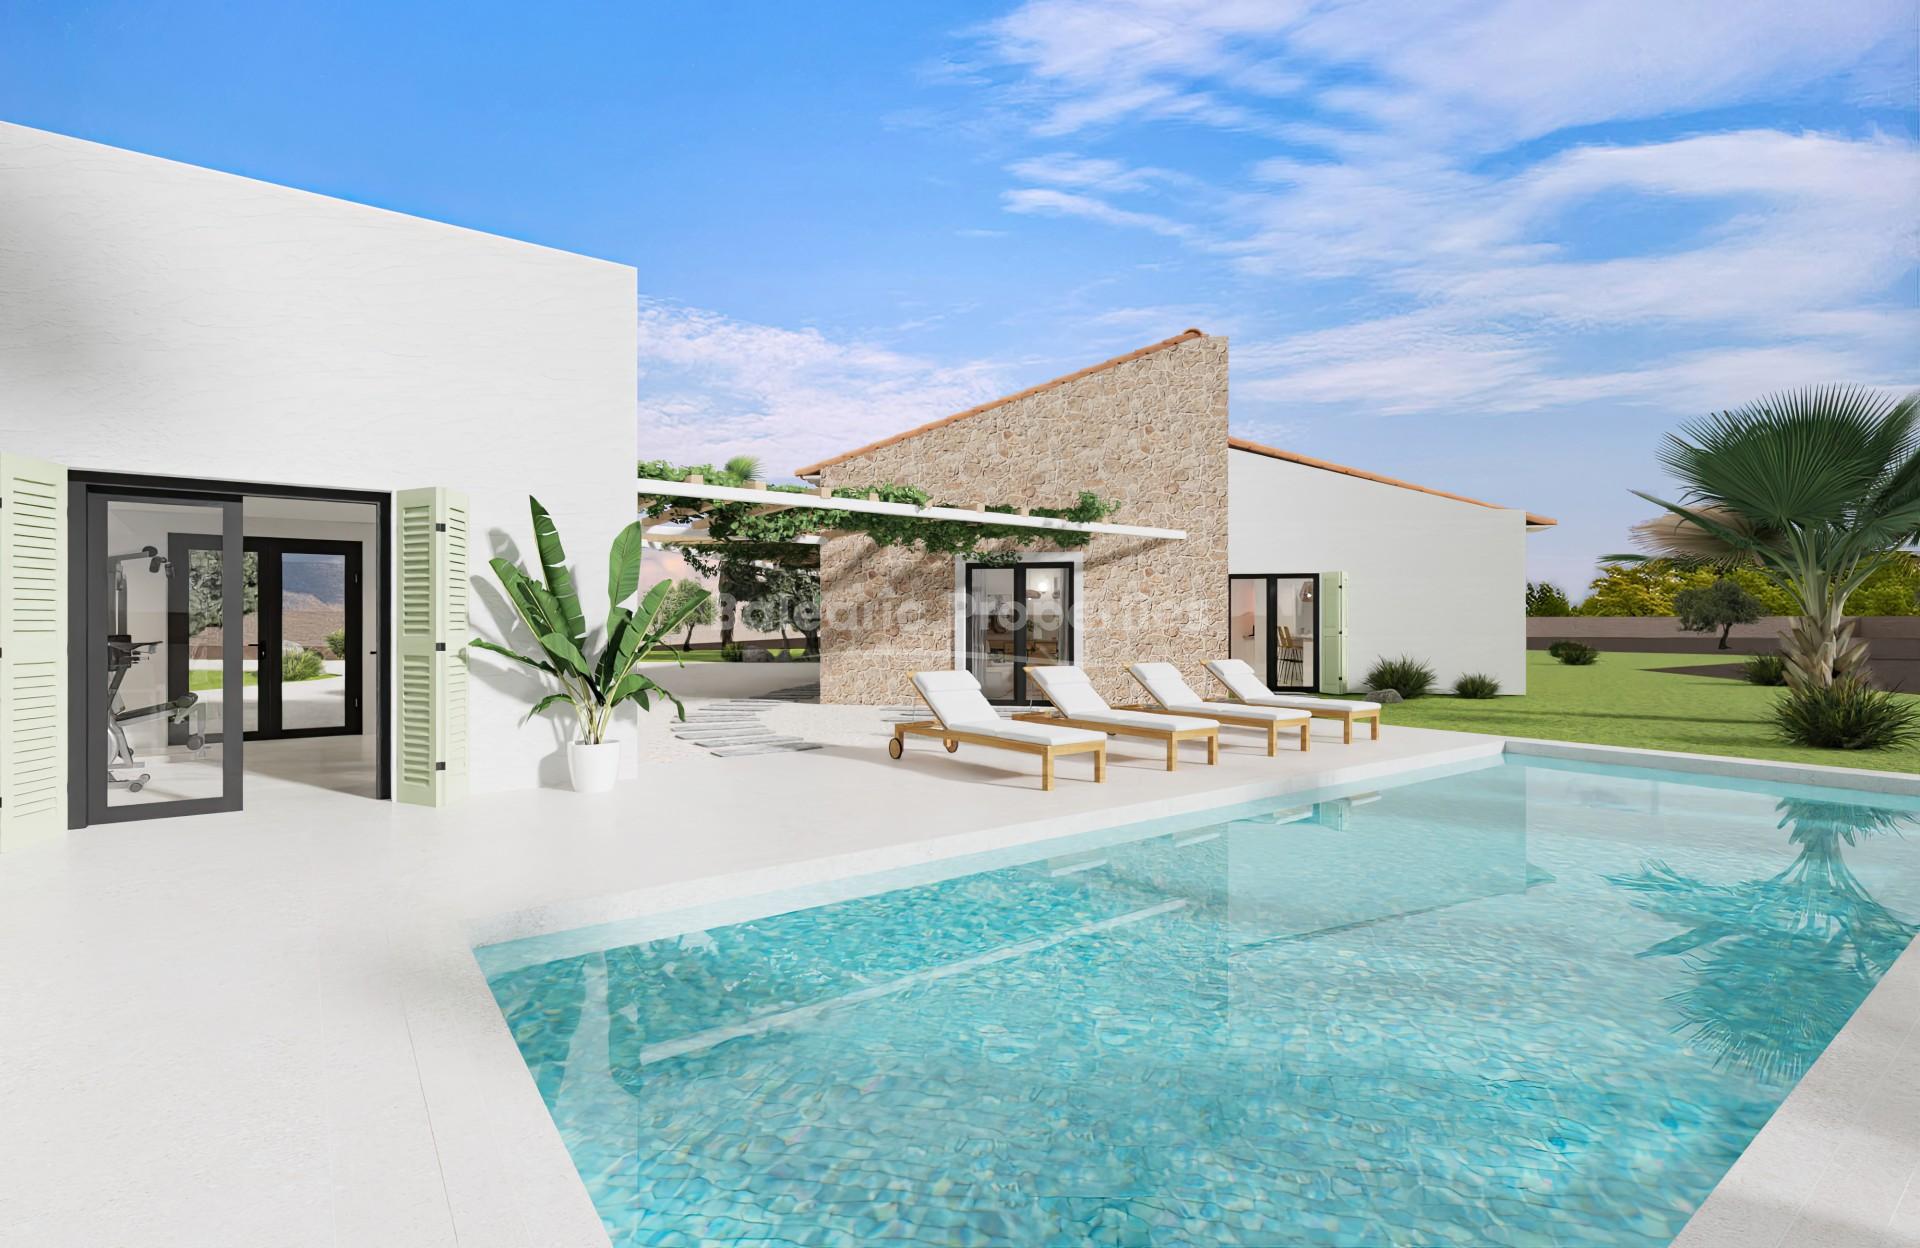 High-quality project for sale in a residential area near Portol, Mallorca